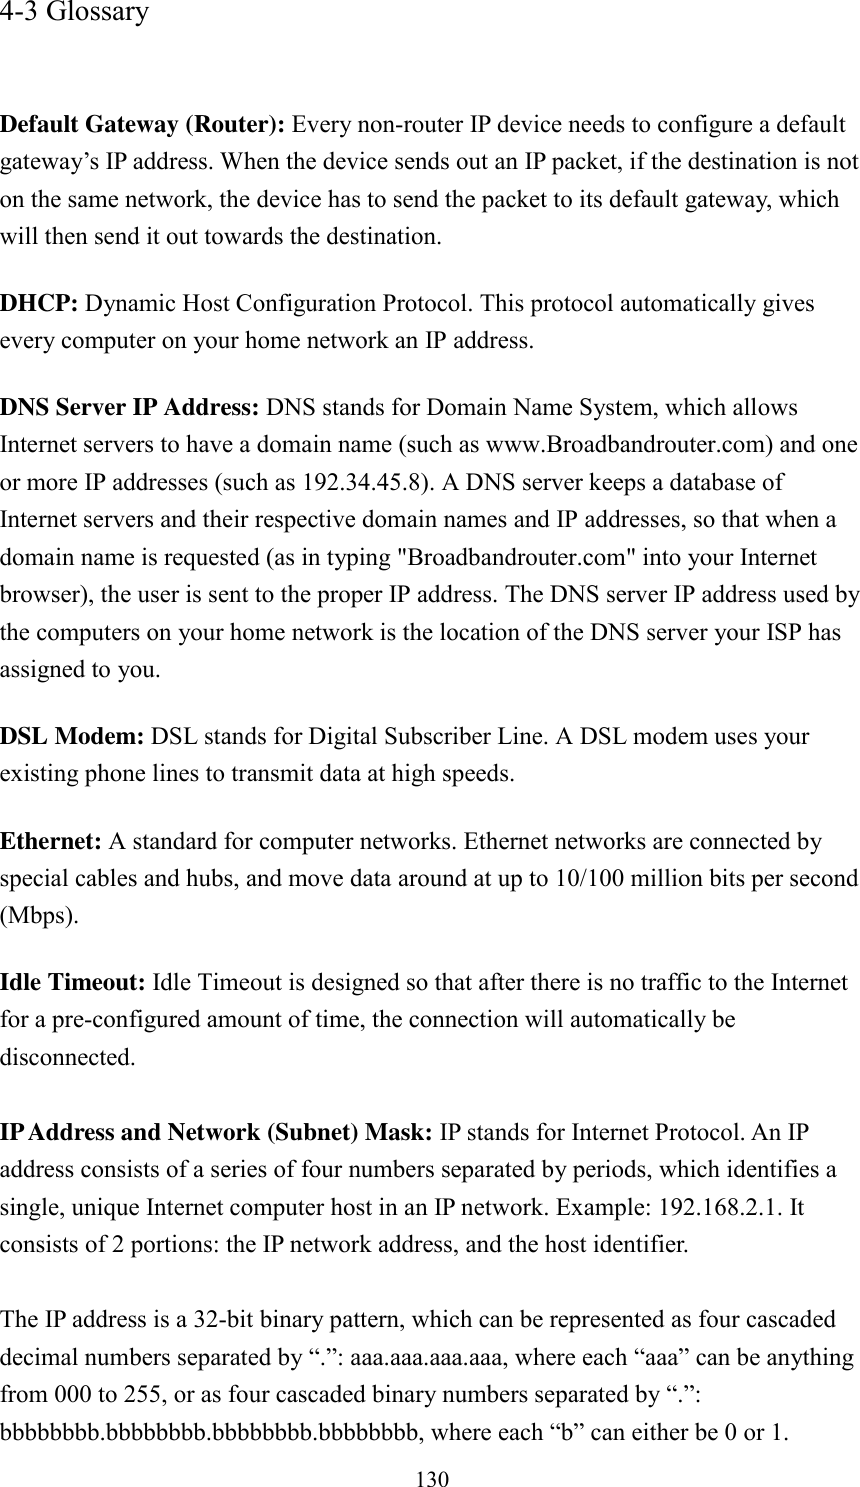 130 4-3 Glossary   Default Gateway (Router): Every non-router IP device needs to configure a default gateway’s IP address. When the device sends out an IP packet, if the destination is not on the same network, the device has to send the packet to its default gateway, which will then send it out towards the destination. DHCP: Dynamic Host Configuration Protocol. This protocol automatically gives every computer on your home network an IP address. DNS Server IP Address: DNS stands for Domain Name System, which allows Internet servers to have a domain name (such as www.Broadbandrouter.com) and one or more IP addresses (such as 192.34.45.8). A DNS server keeps a database of Internet servers and their respective domain names and IP addresses, so that when a domain name is requested (as in typing &quot;Broadbandrouter.com&quot; into your Internet browser), the user is sent to the proper IP address. The DNS server IP address used by the computers on your home network is the location of the DNS server your ISP has assigned to you.   DSL Modem: DSL stands for Digital Subscriber Line. A DSL modem uses your existing phone lines to transmit data at high speeds.   Ethernet: A standard for computer networks. Ethernet networks are connected by special cables and hubs, and move data around at up to 10/100 million bits per second (Mbps).   Idle Timeout: Idle Timeout is designed so that after there is no traffic to the Internet for a pre-configured amount of time, the connection will automatically be disconnected.  IP Address and Network (Subnet) Mask: IP stands for Internet Protocol. An IP address consists of a series of four numbers separated by periods, which identifies a single, unique Internet computer host in an IP network. Example: 192.168.2.1. It consists of 2 portions: the IP network address, and the host identifier.  The IP address is a 32-bit binary pattern, which can be represented as four cascaded decimal numbers separated by “.”: aaa.aaa.aaa.aaa, where each “aaa” can be anything from 000 to 255, or as four cascaded binary numbers separated by “.”: bbbbbbbb.bbbbbbbb.bbbbbbbb.bbbbbbbb, where each “b” can either be 0 or 1. 